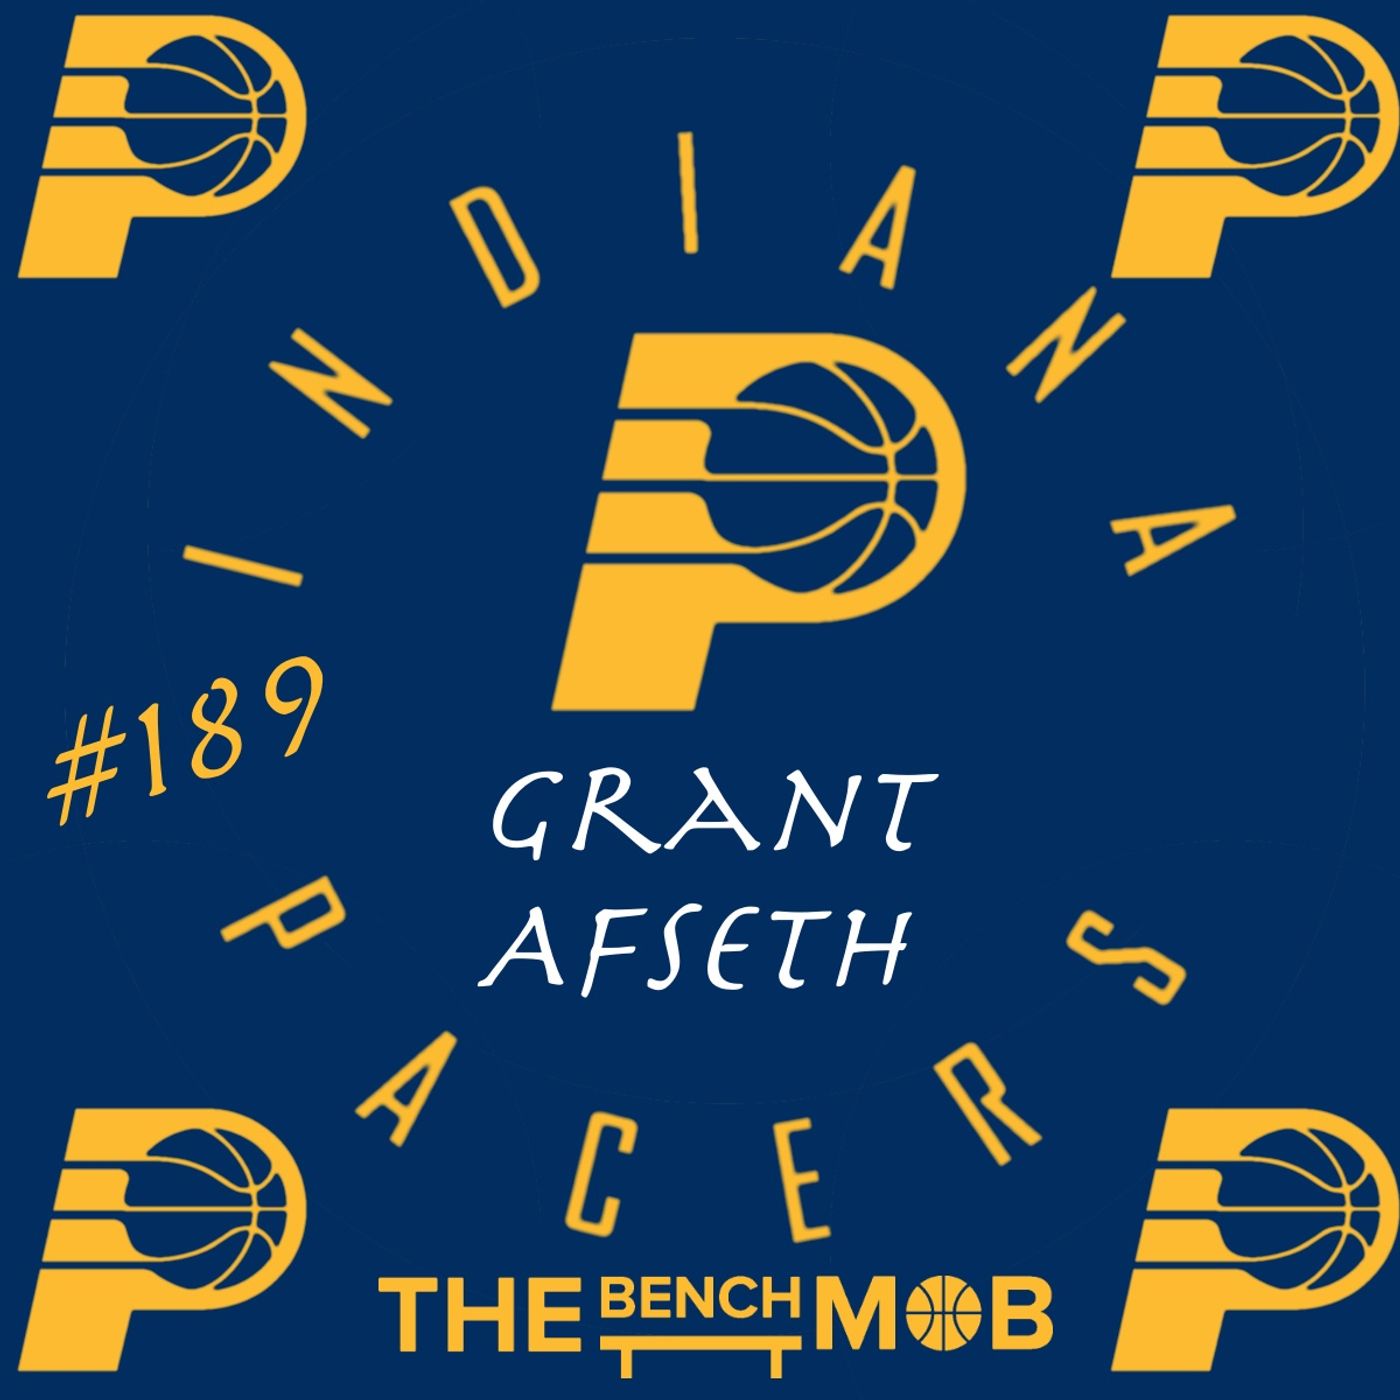 Indiana Pacers Offseason w/ Grant Afseth